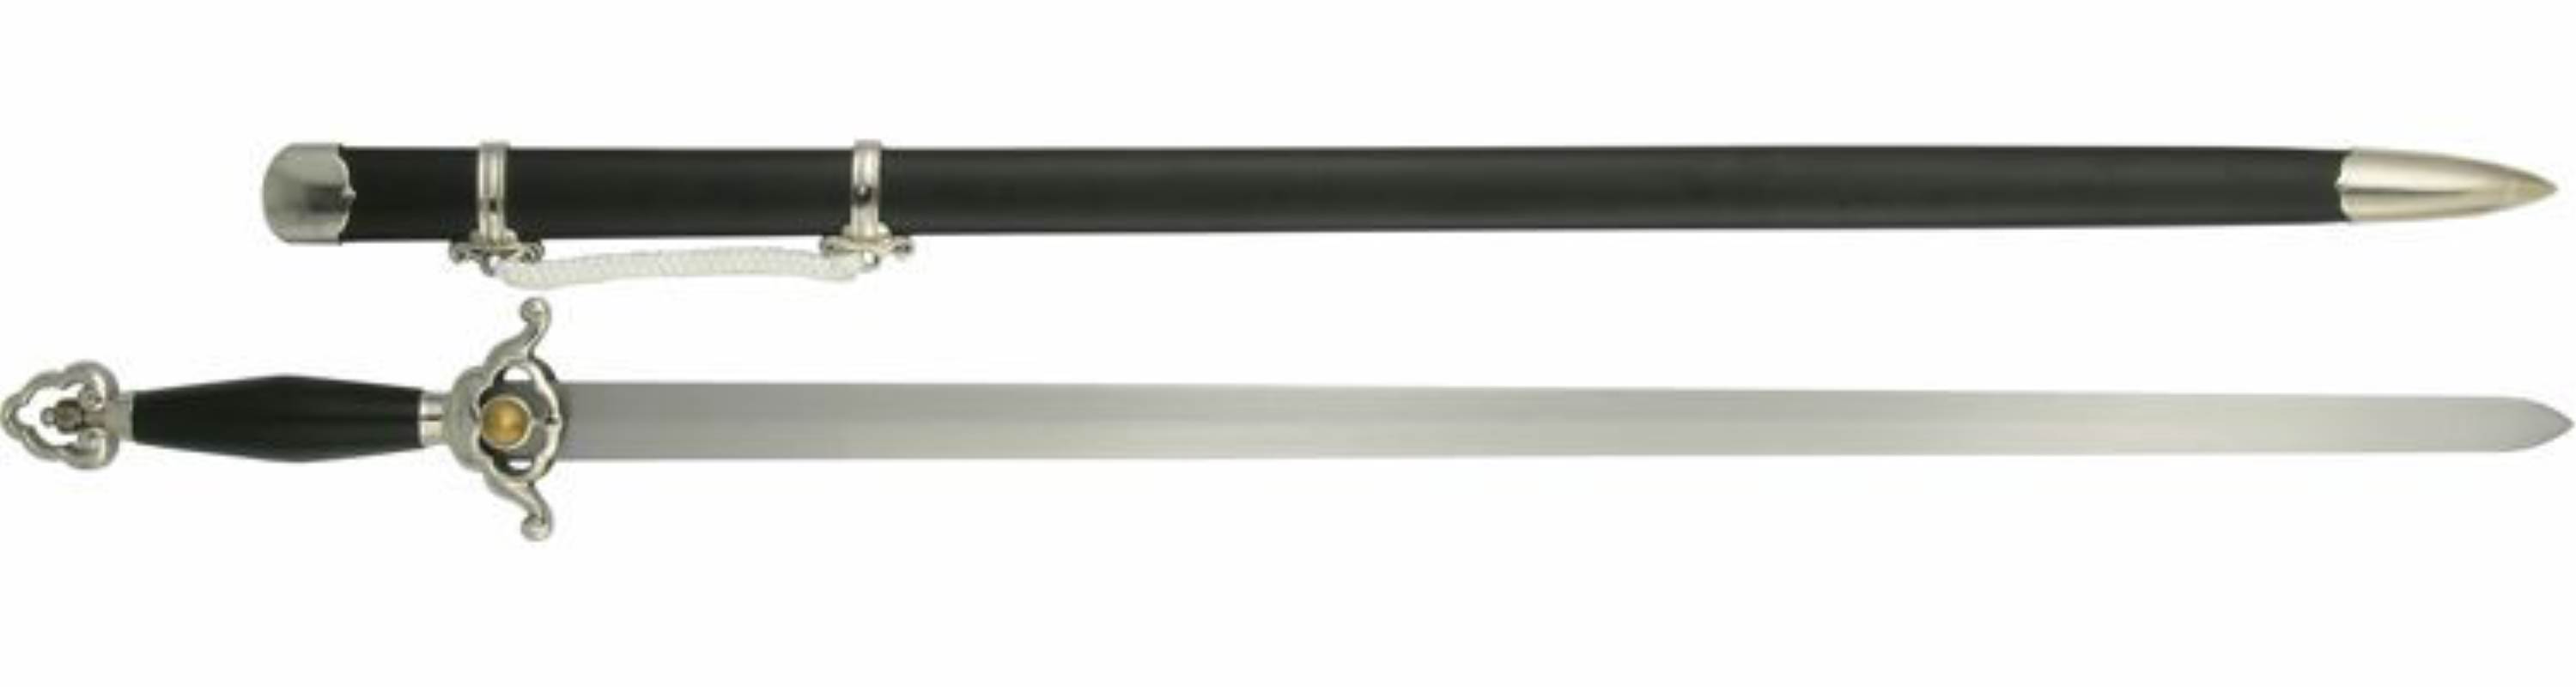 Practical Tai Chi Sword - Functional Chinese Swords at